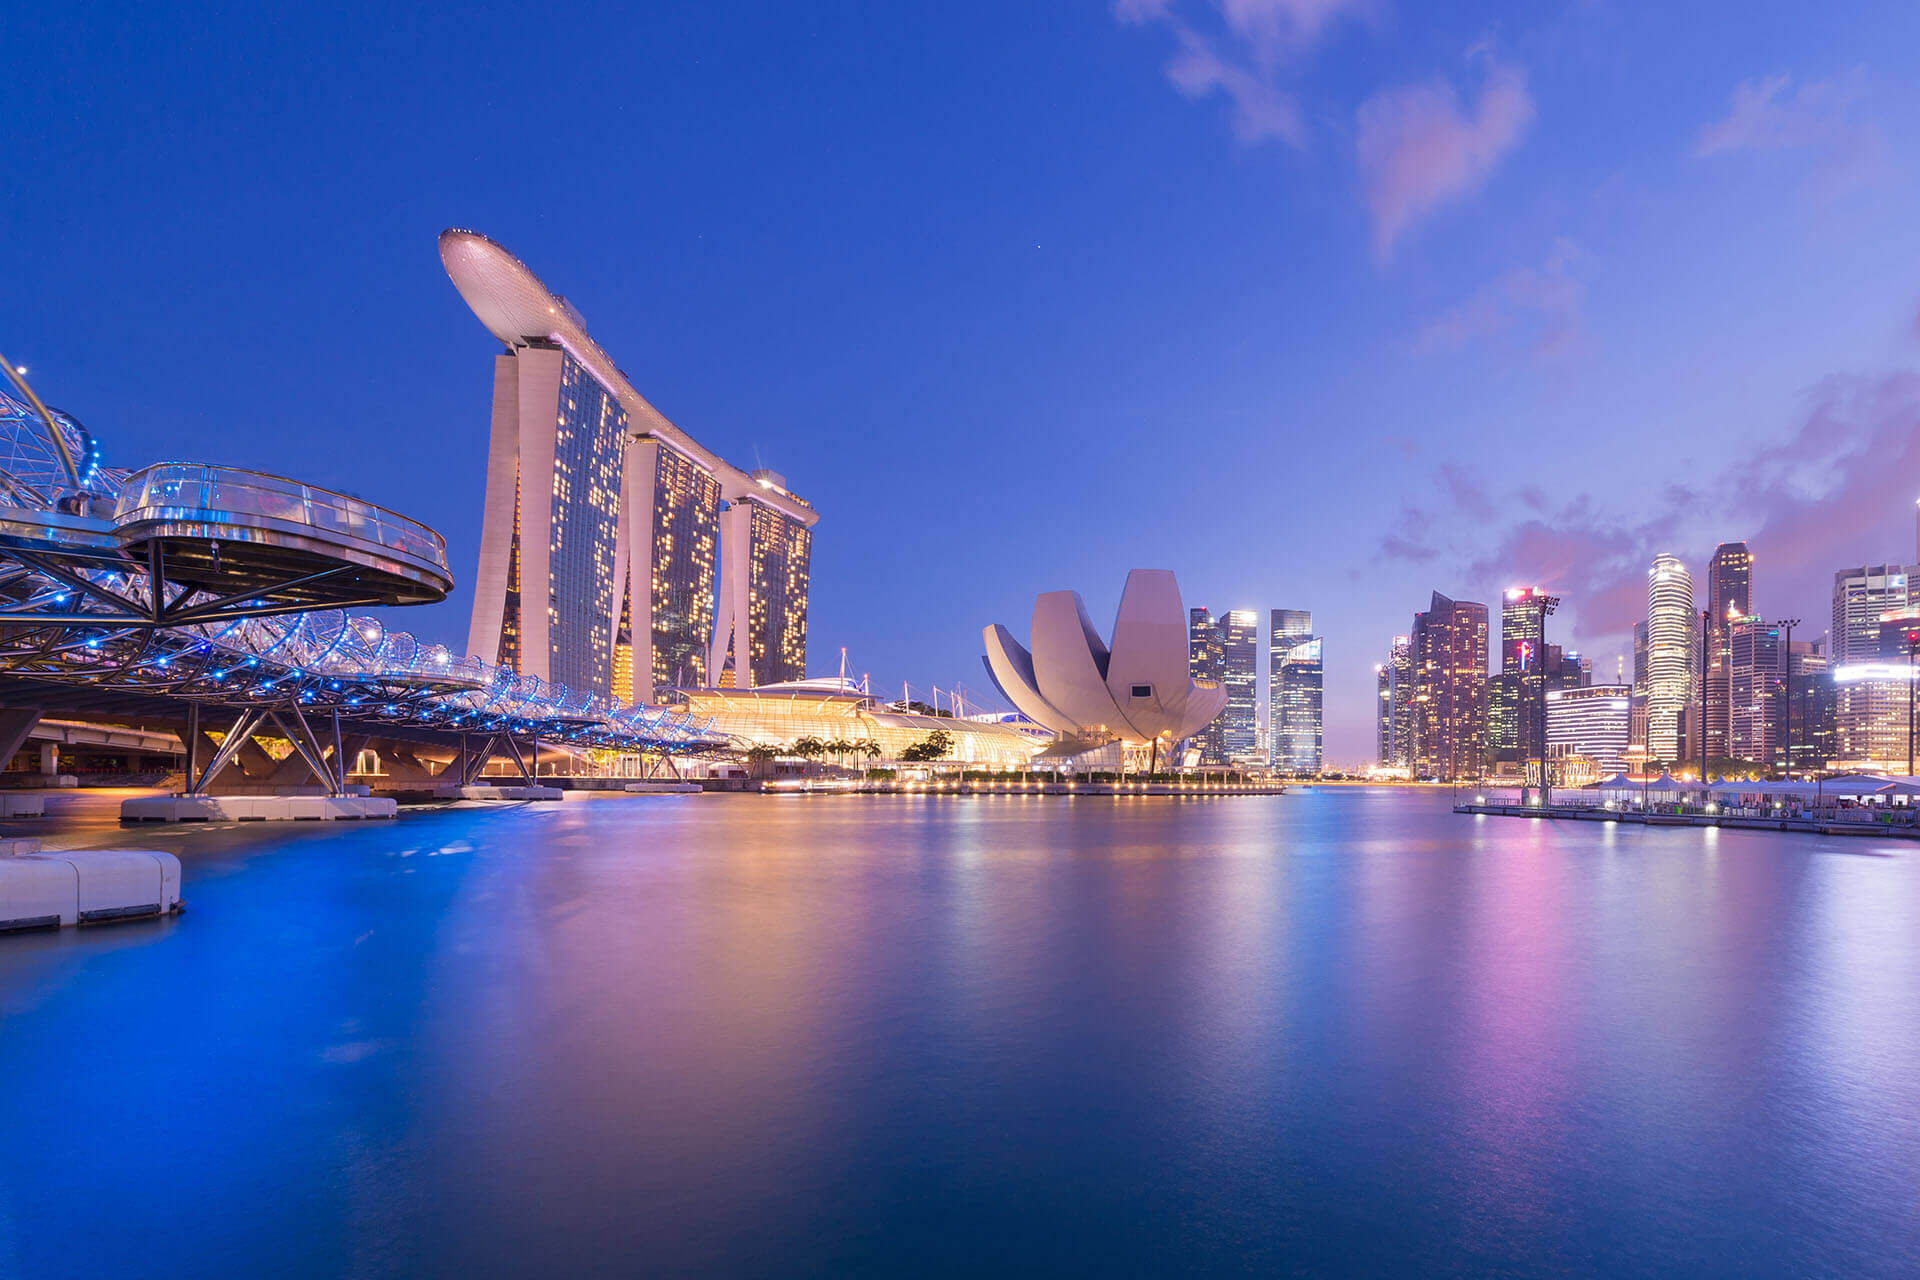 Singapore: Upcoming Changes for Employment Passes